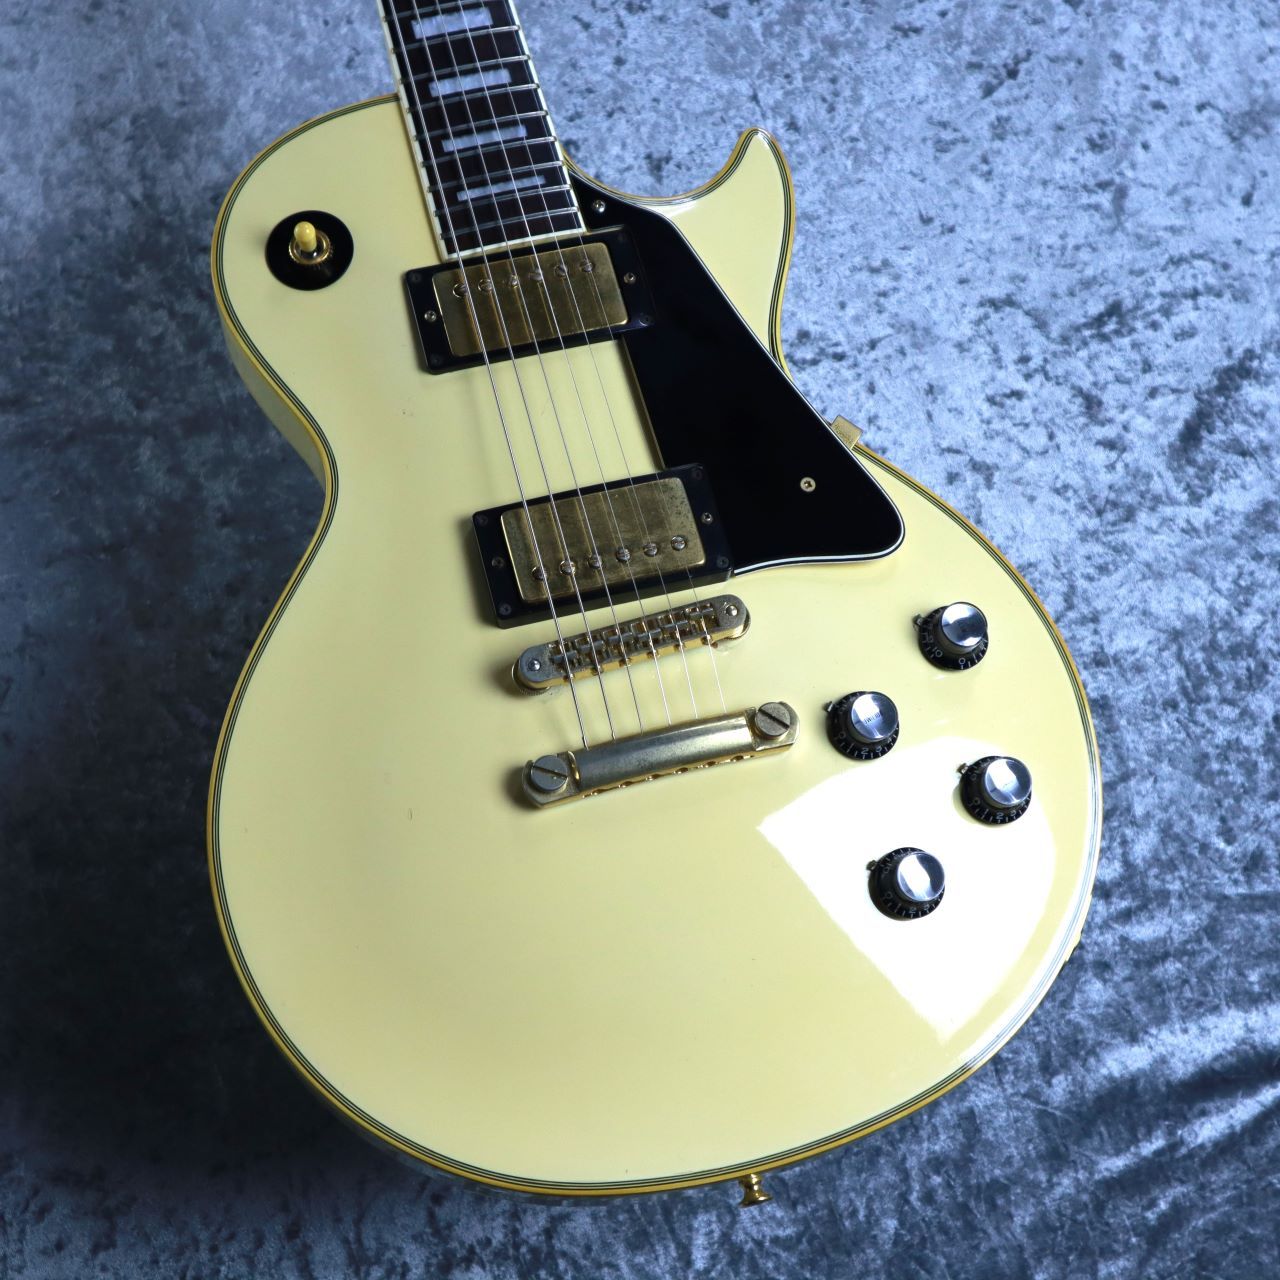 Orville by Gibson 【レアモデル】Les Paul Custom Alpine White [3.82 